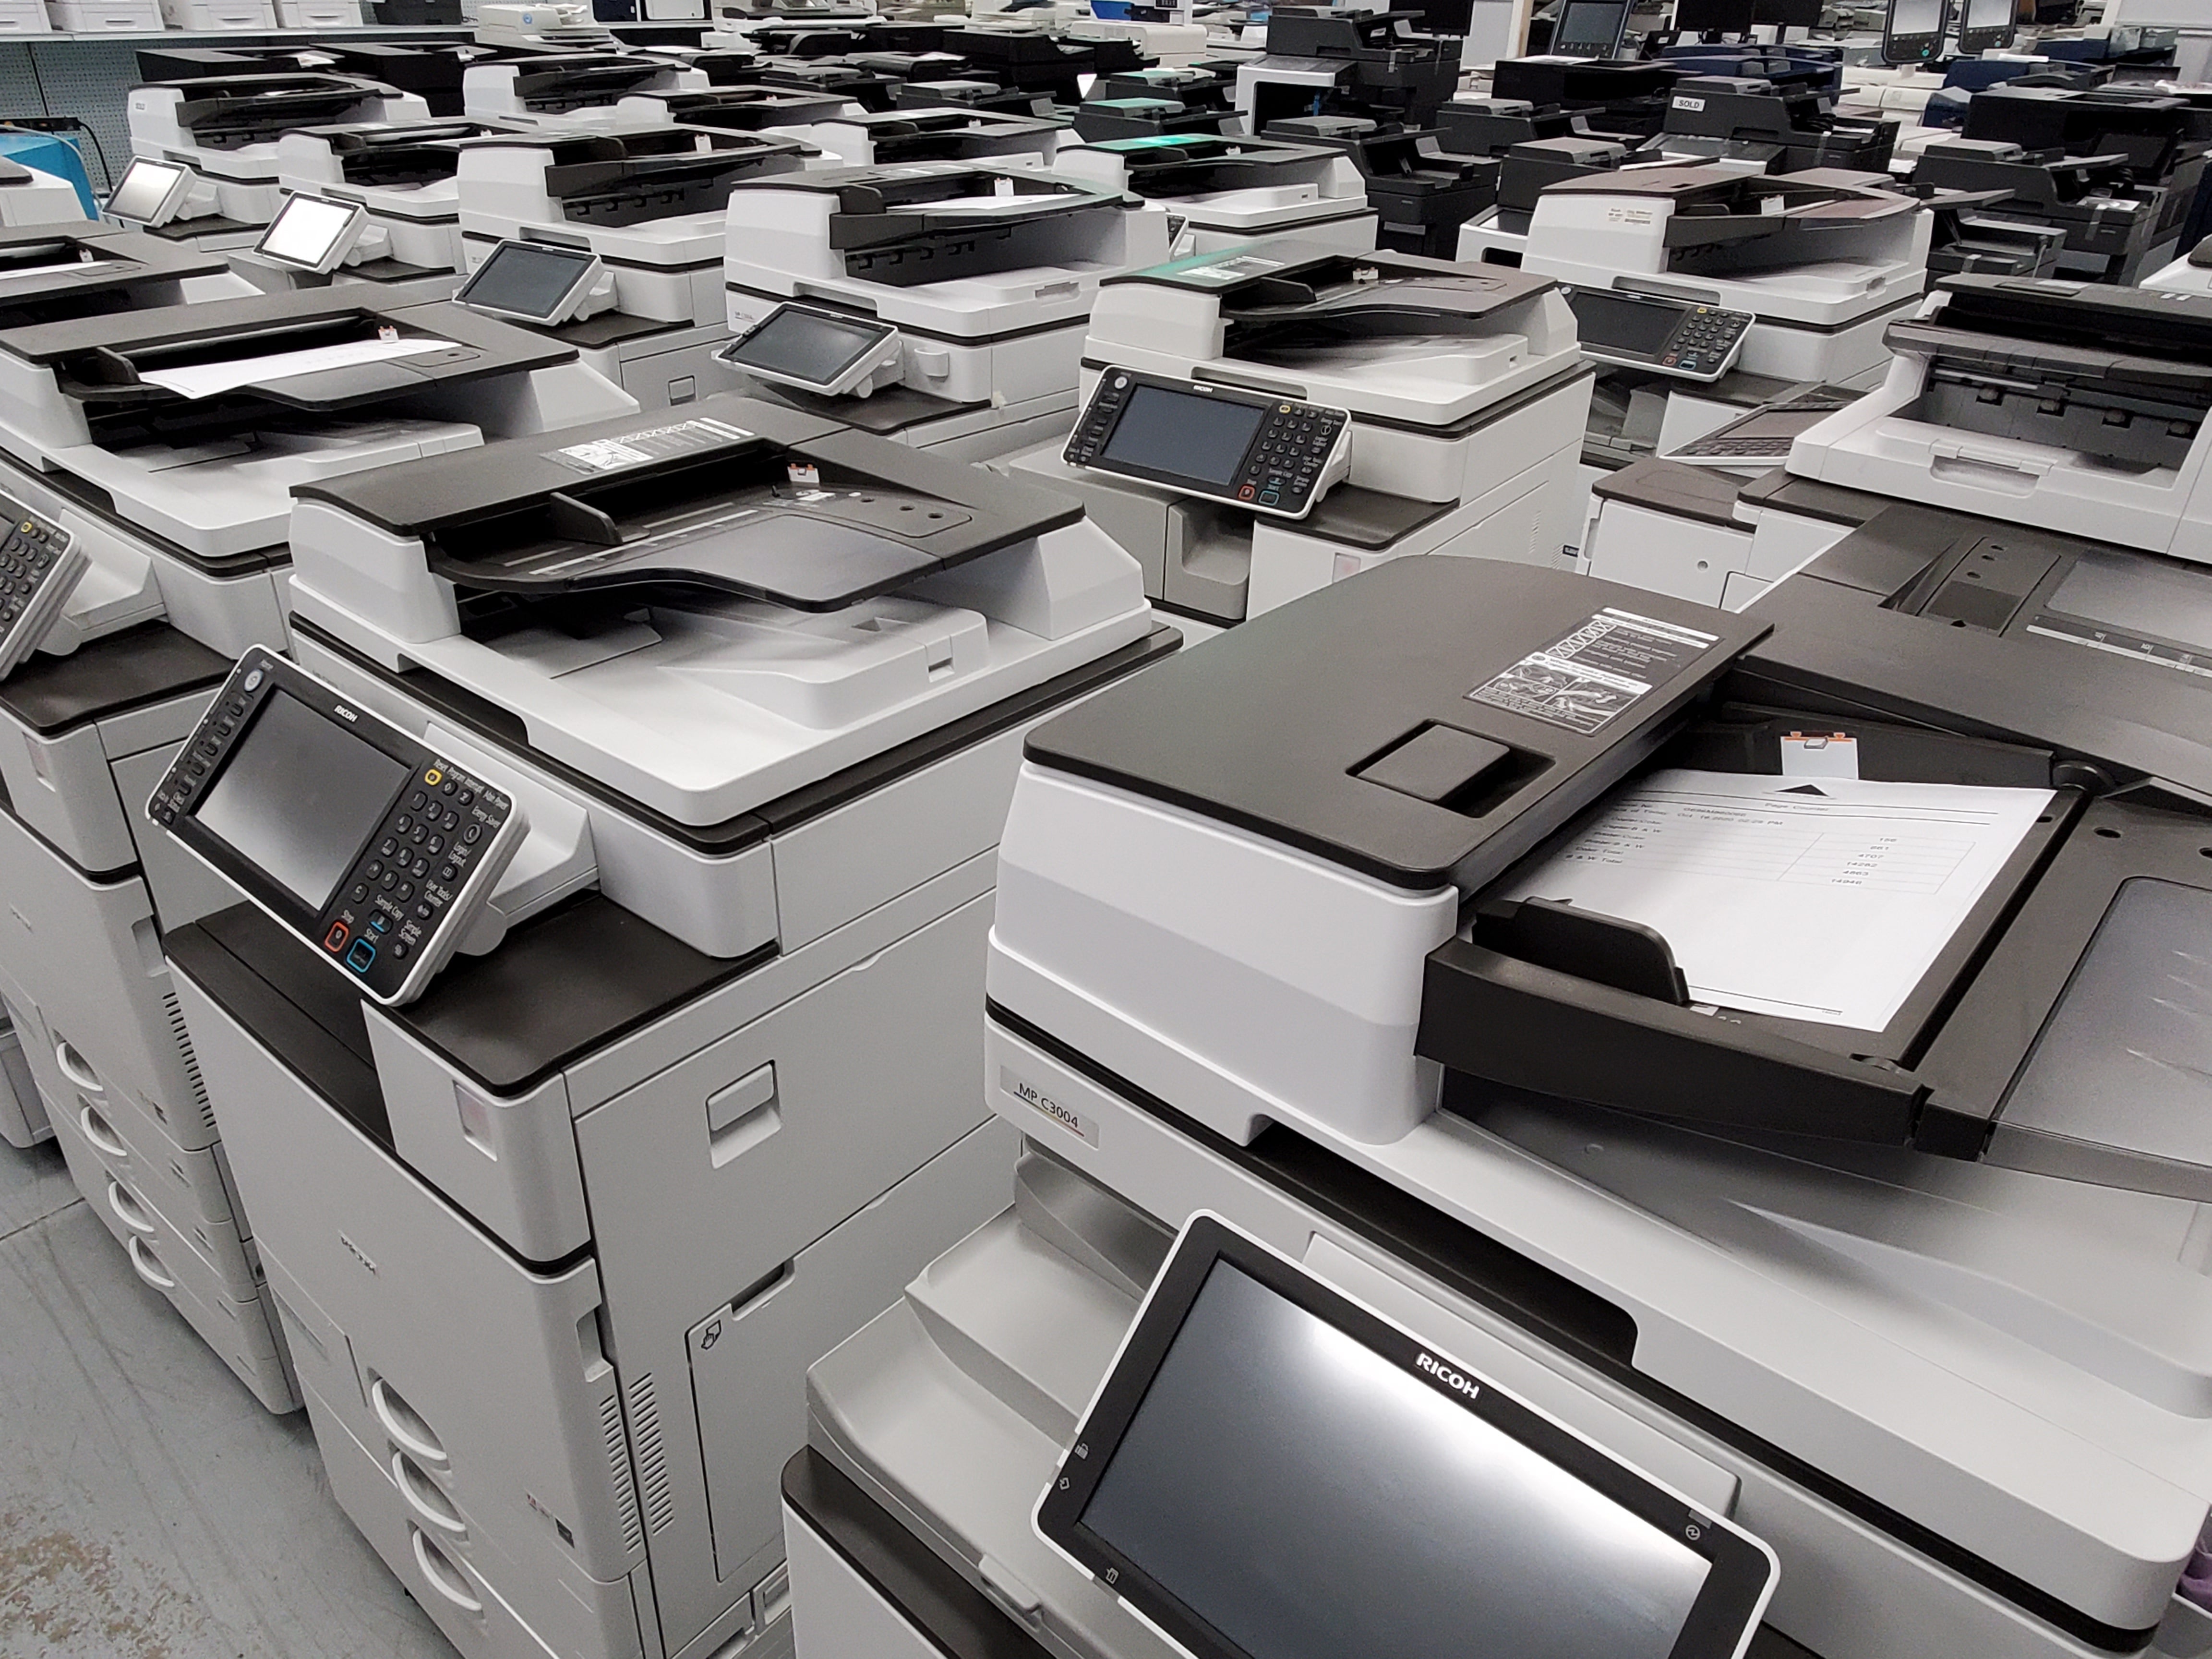 Ricoh's office printers and MFPs offer a variety of speeds and sizes to suit your business.